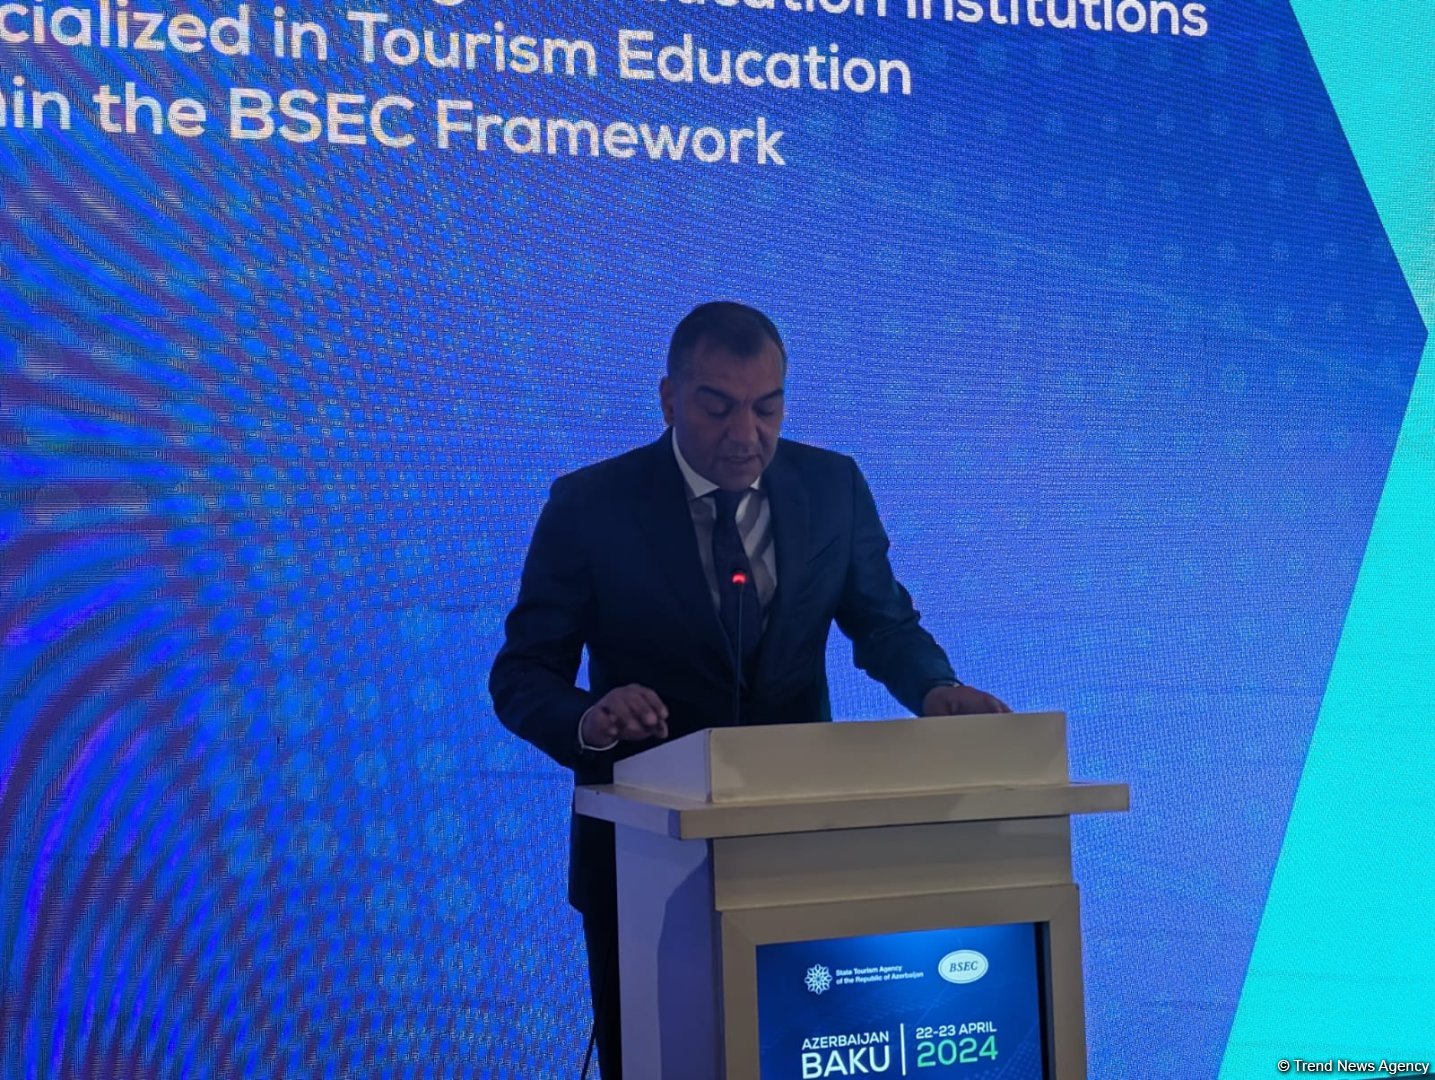 Tourism makes significant contribution to long-term resilience - chairman